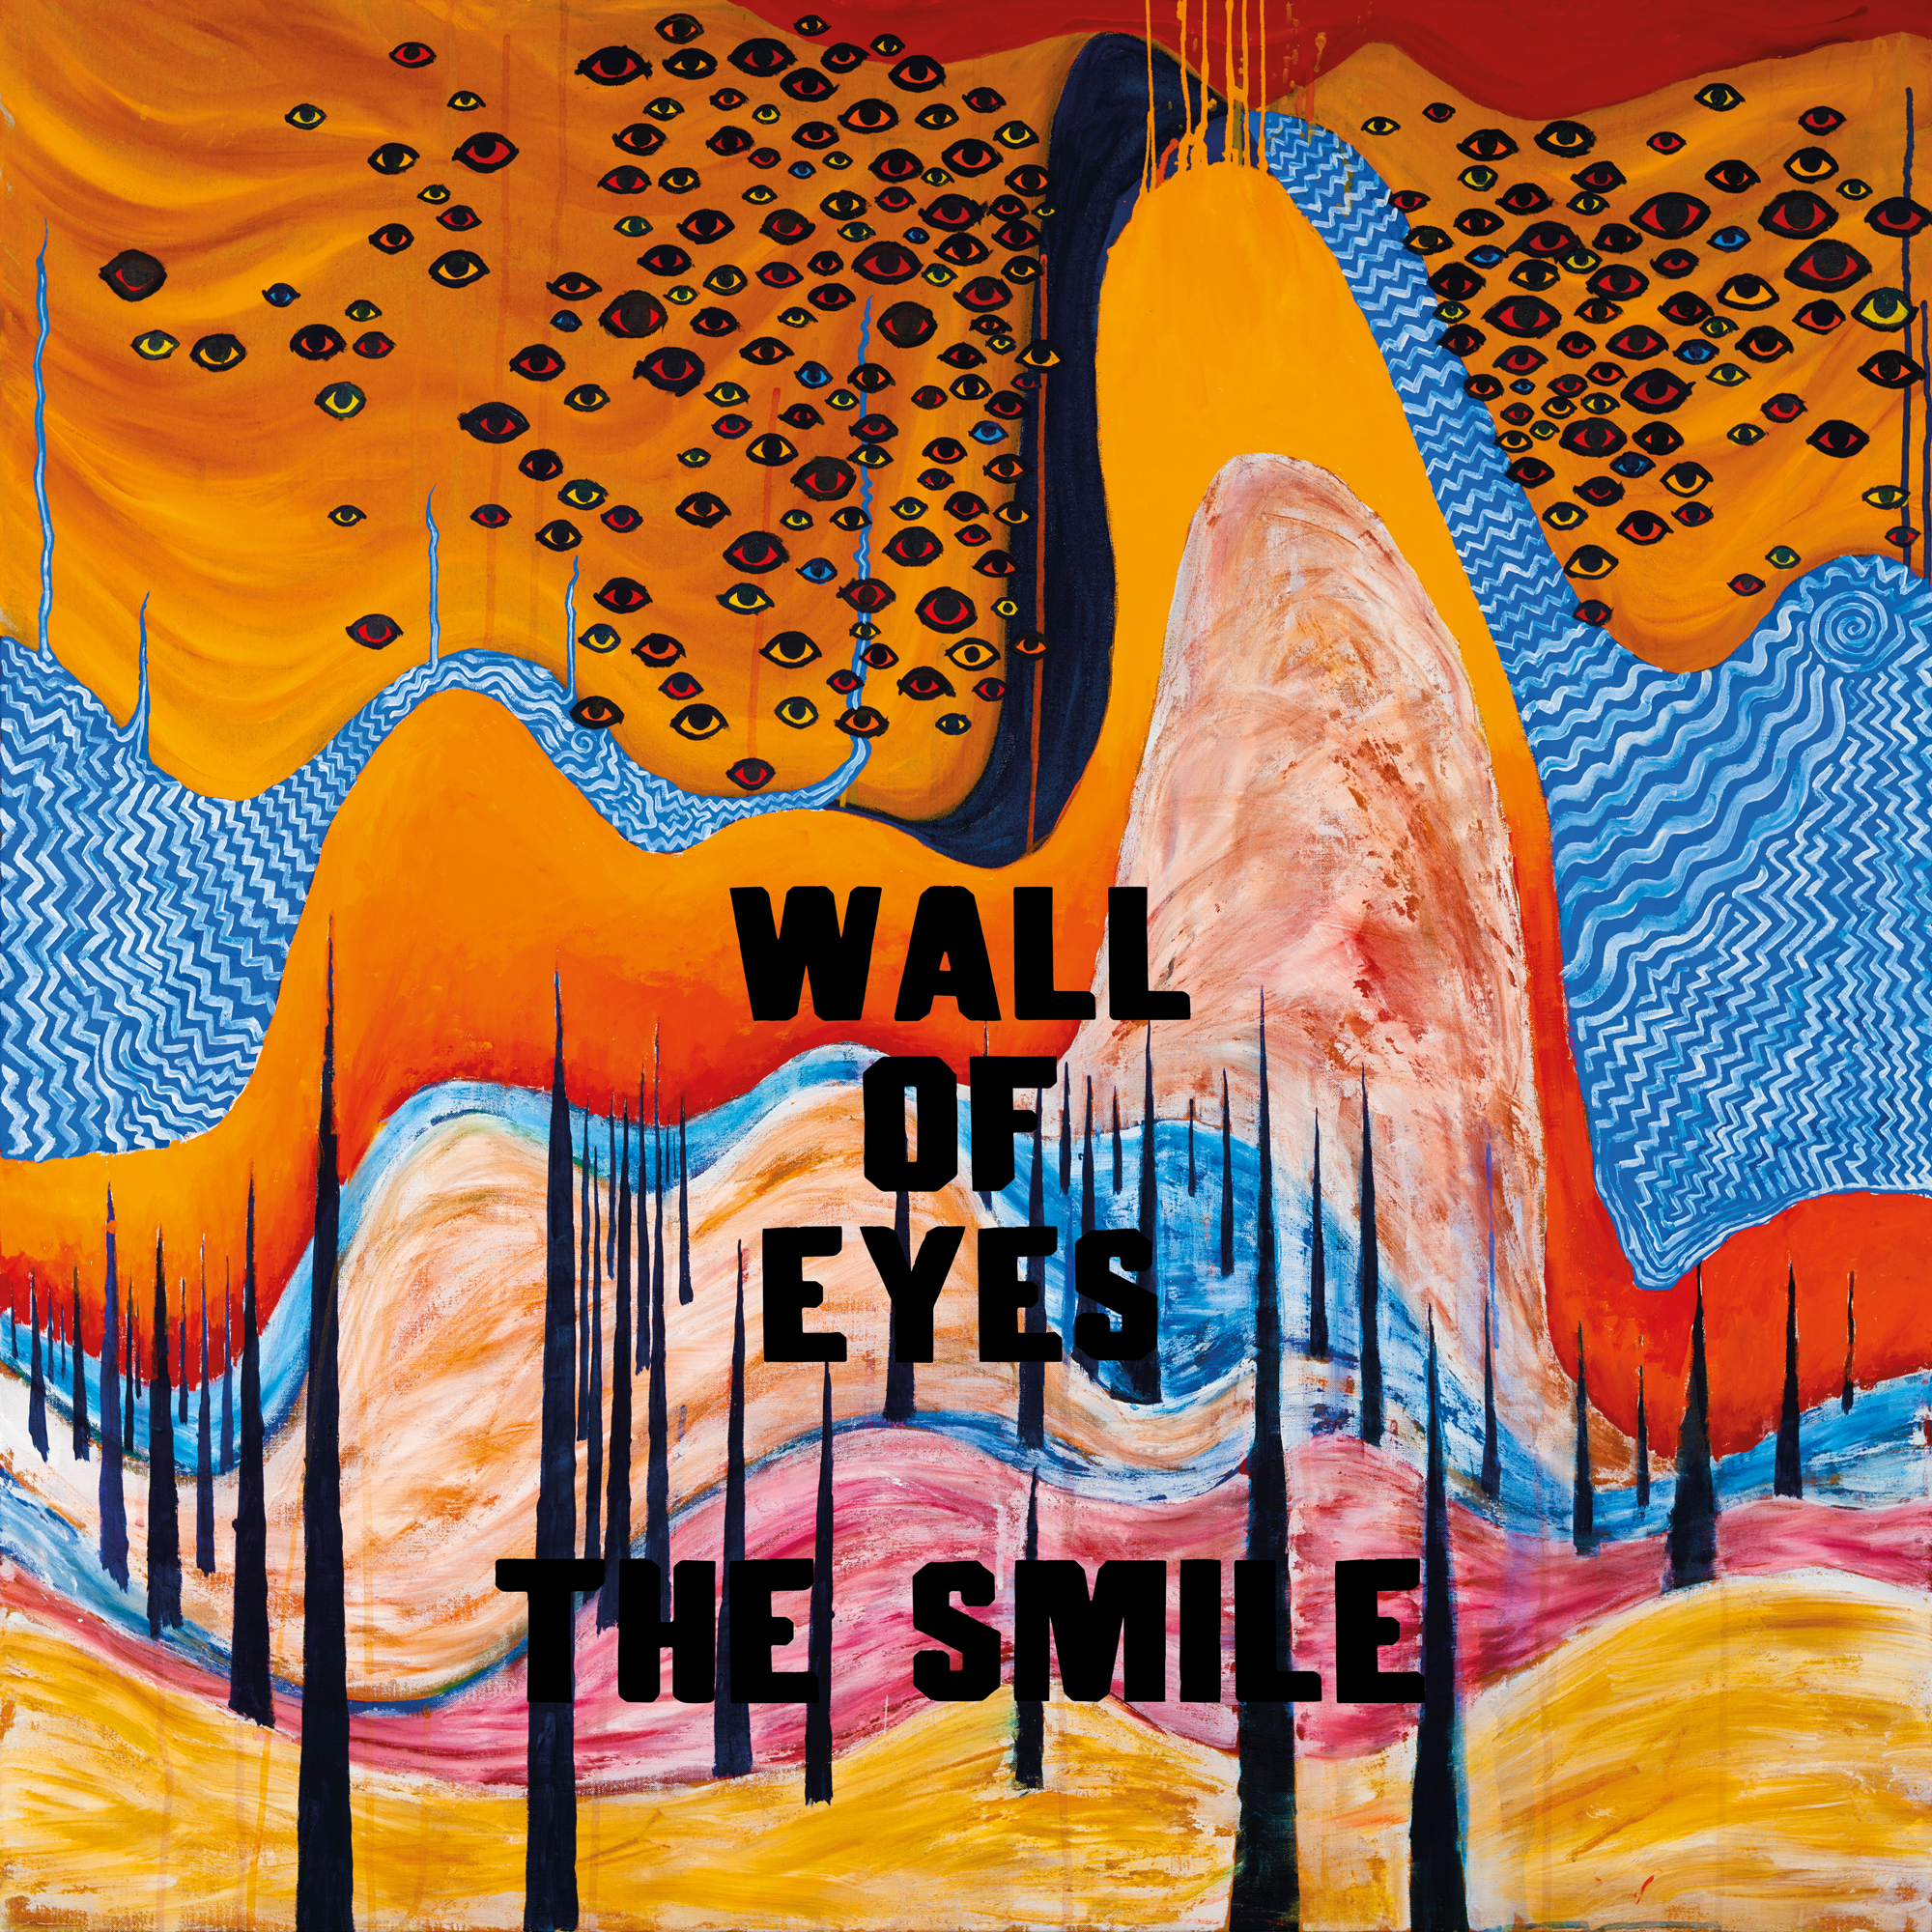 The Smile - Wall Of Eyes: Limited Sky Blue Vinyl LP